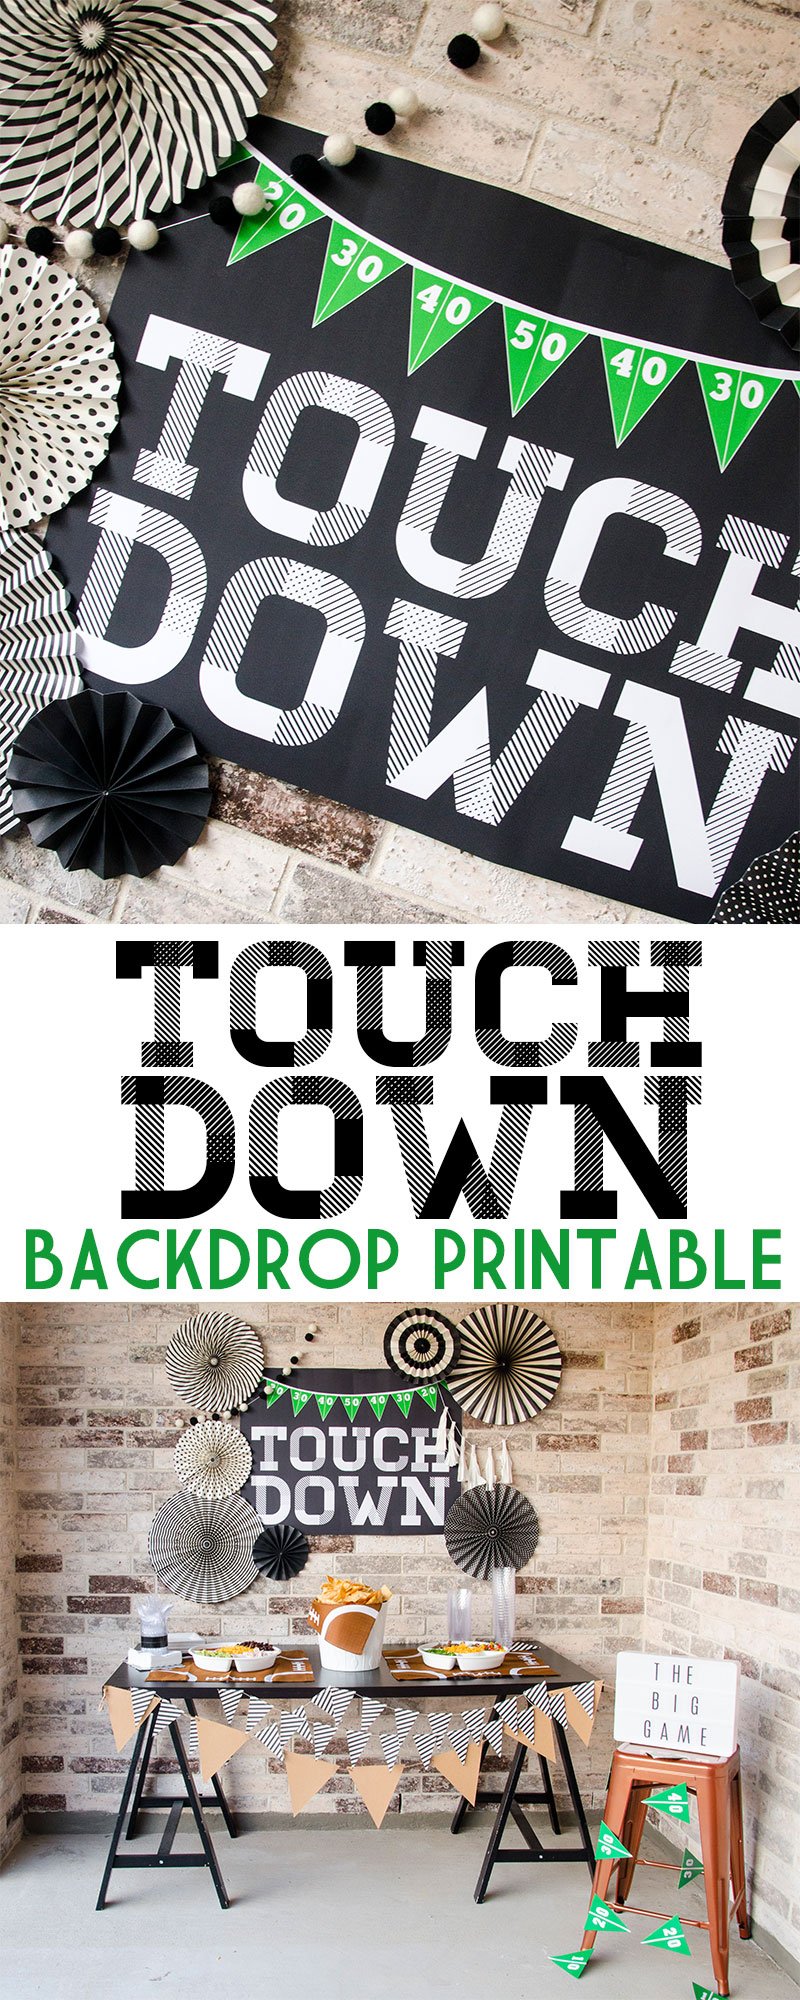 DIY Football Party Ideas & Printable Backdrop by Lindi Haws of Love The Day